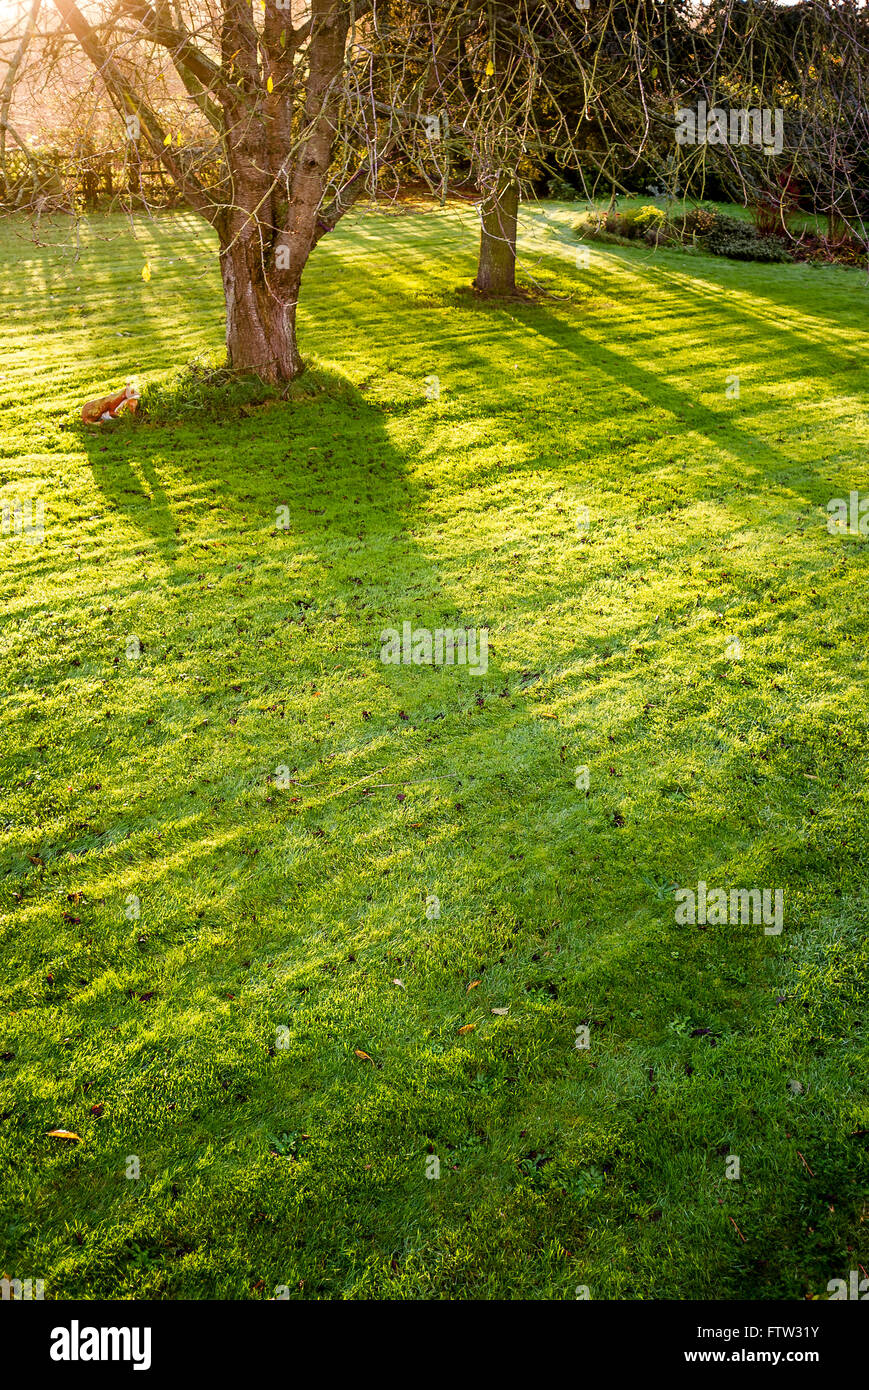 Early morning sunlight glances across lawn showing lawnmower pressure tracks Stock Photo